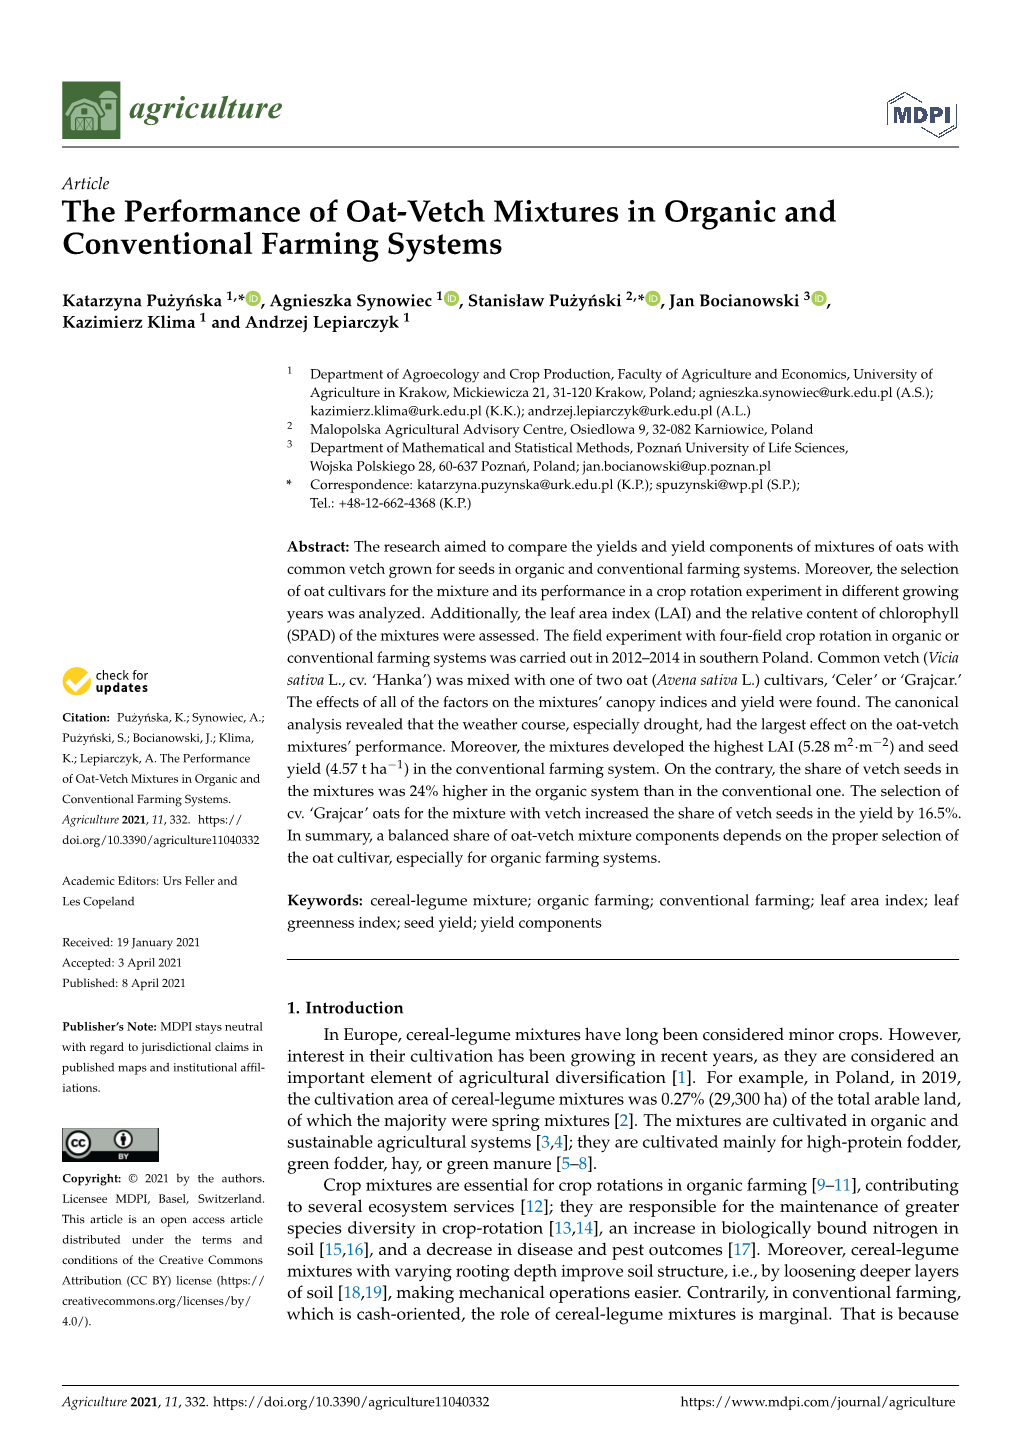 The Performance of Oat-Vetch Mixtures in Organic and Conventional Farming Systems